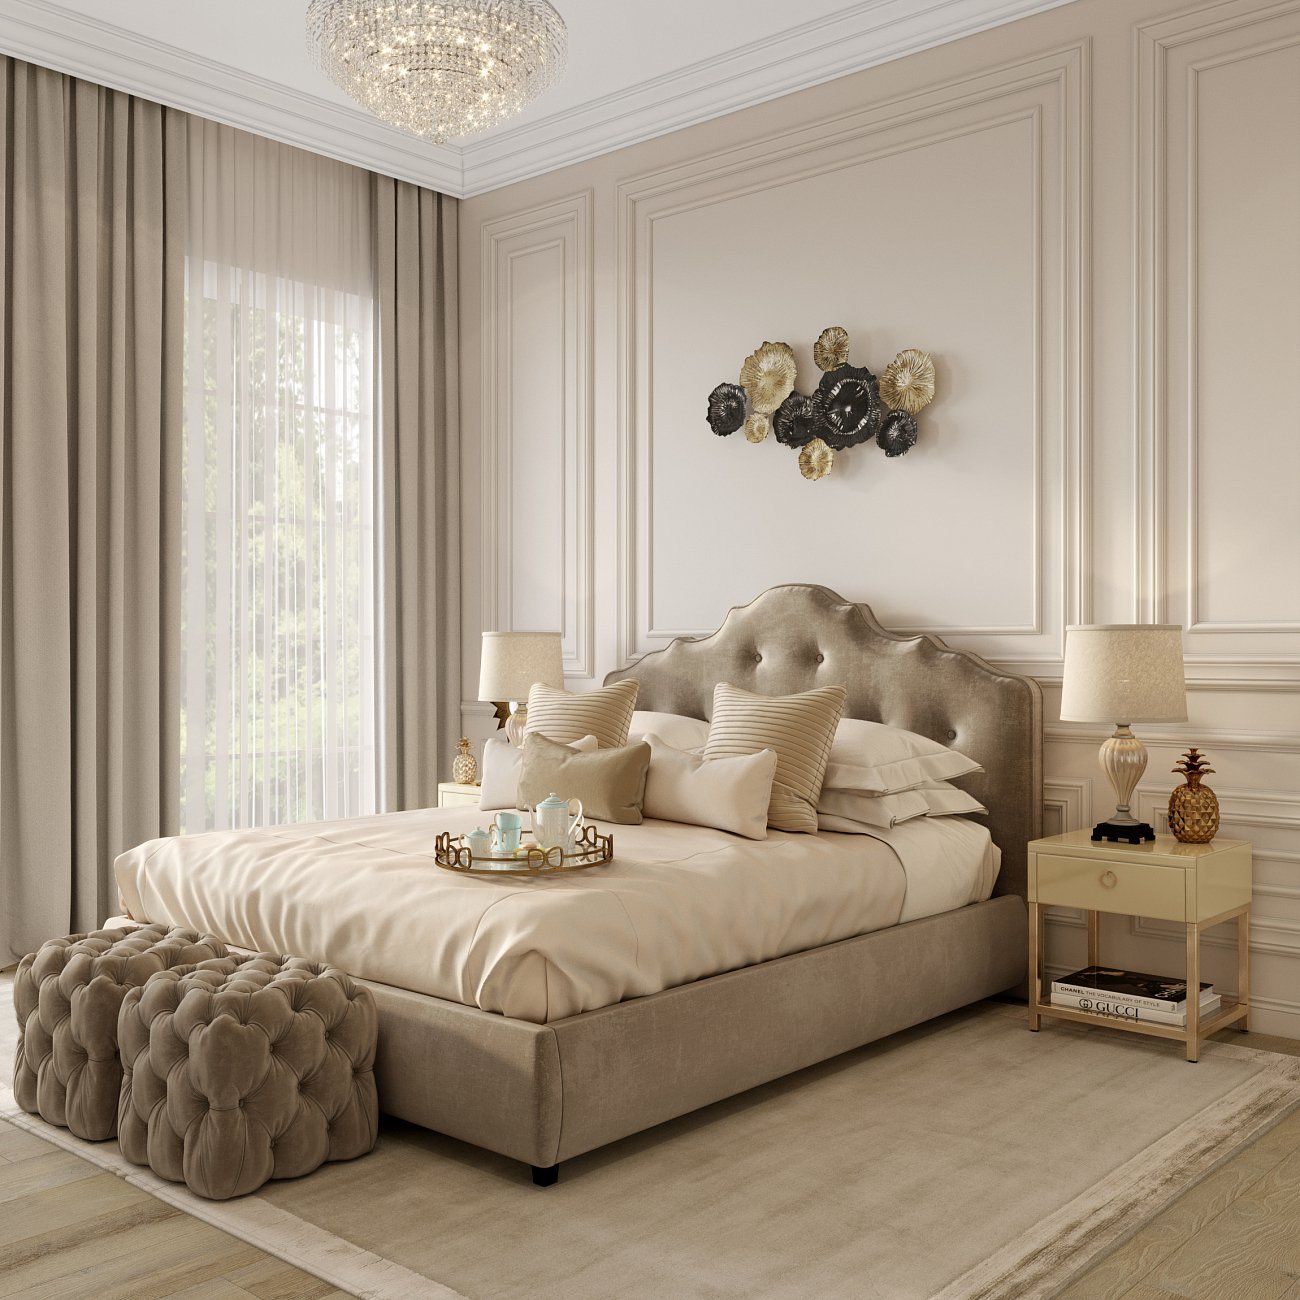 Double bed 160x200 cm brown-gray Palace